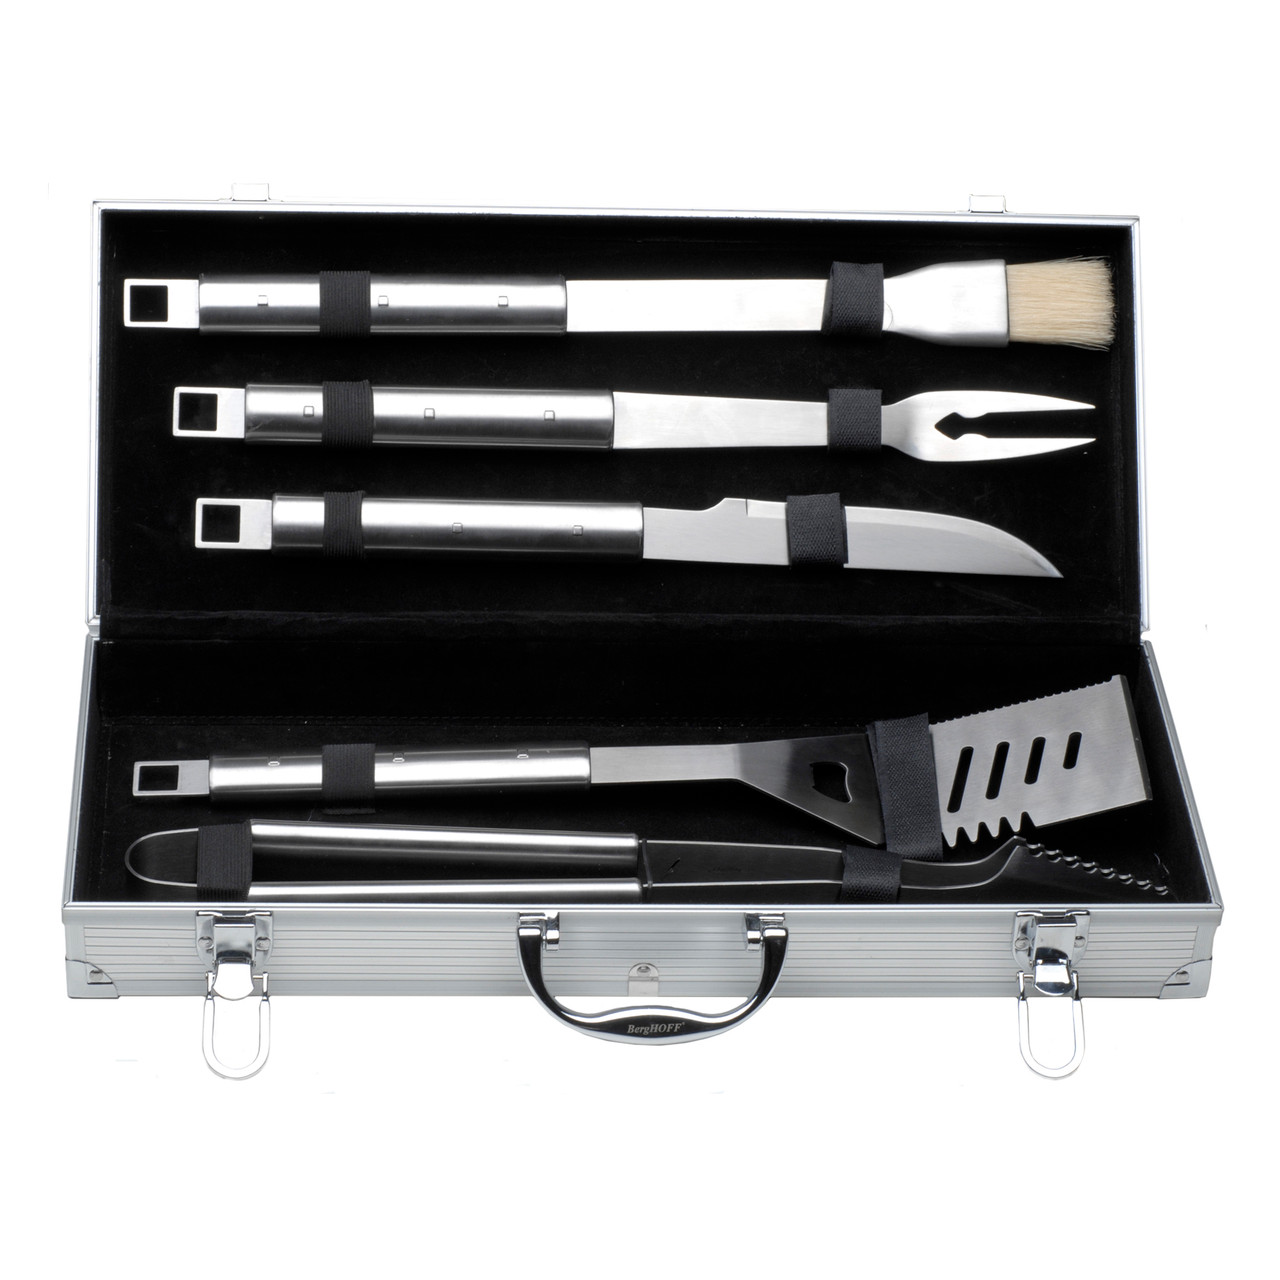 A set of stainless steel bbq utensils organized in an aluminum carrying case